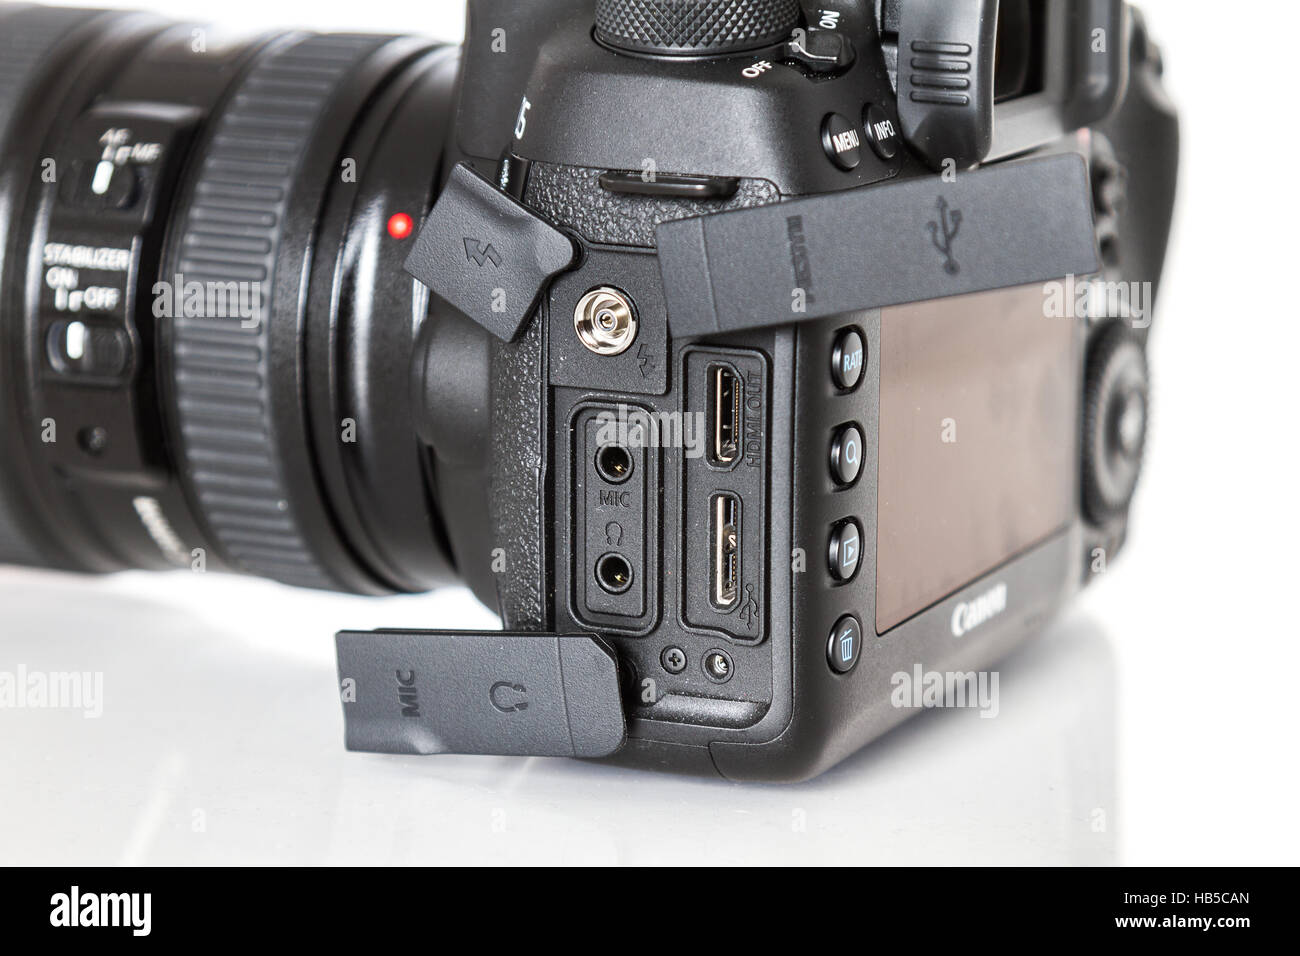 Canon 5D Mark IV camera showing conectors, with Canon EF 24-70mm f/2.8L II USM lens on a white background Stock Photo